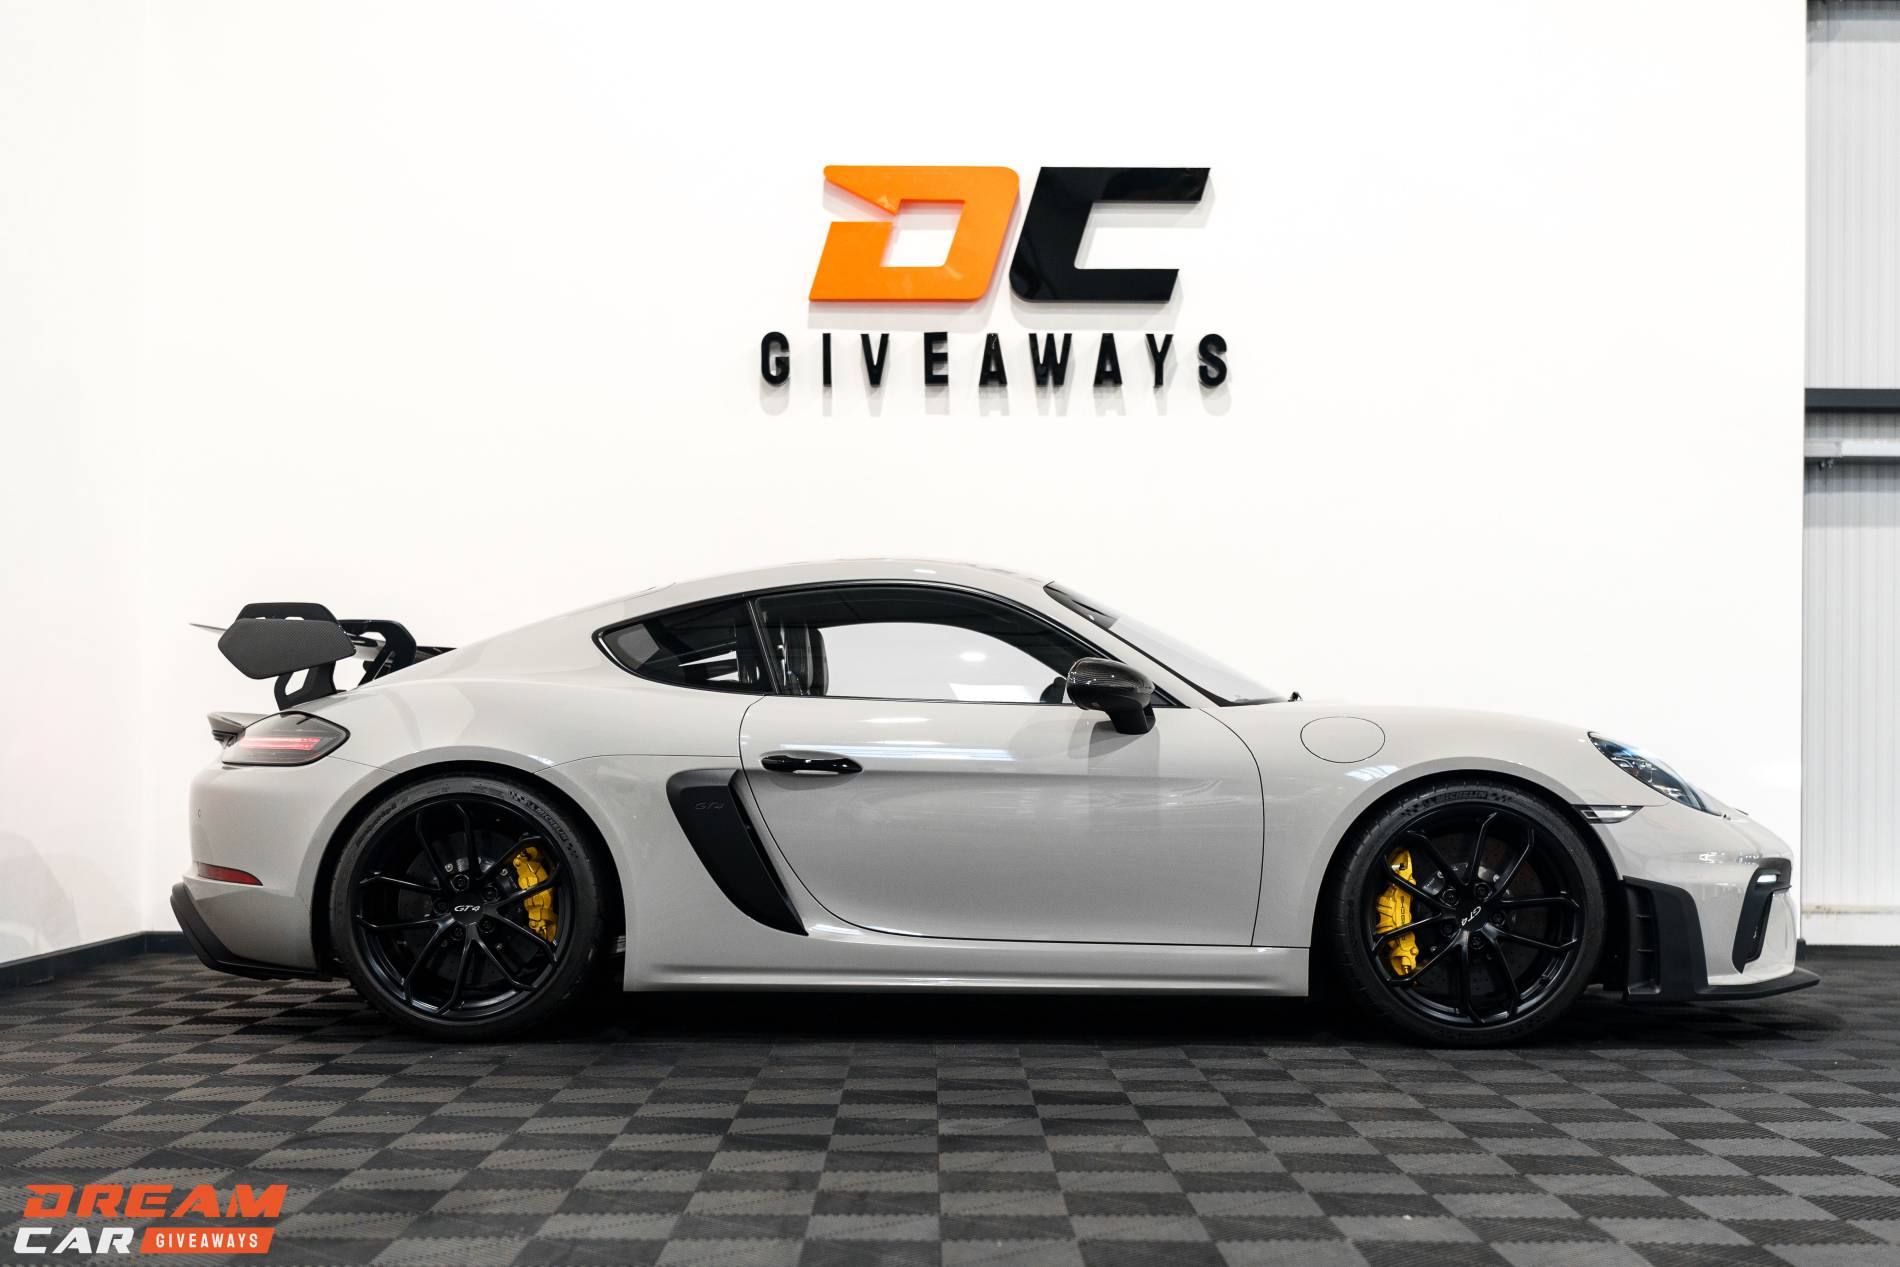 Win this Porsche GT4 RS Evocation & £2,000 or £70,000 Tax Free